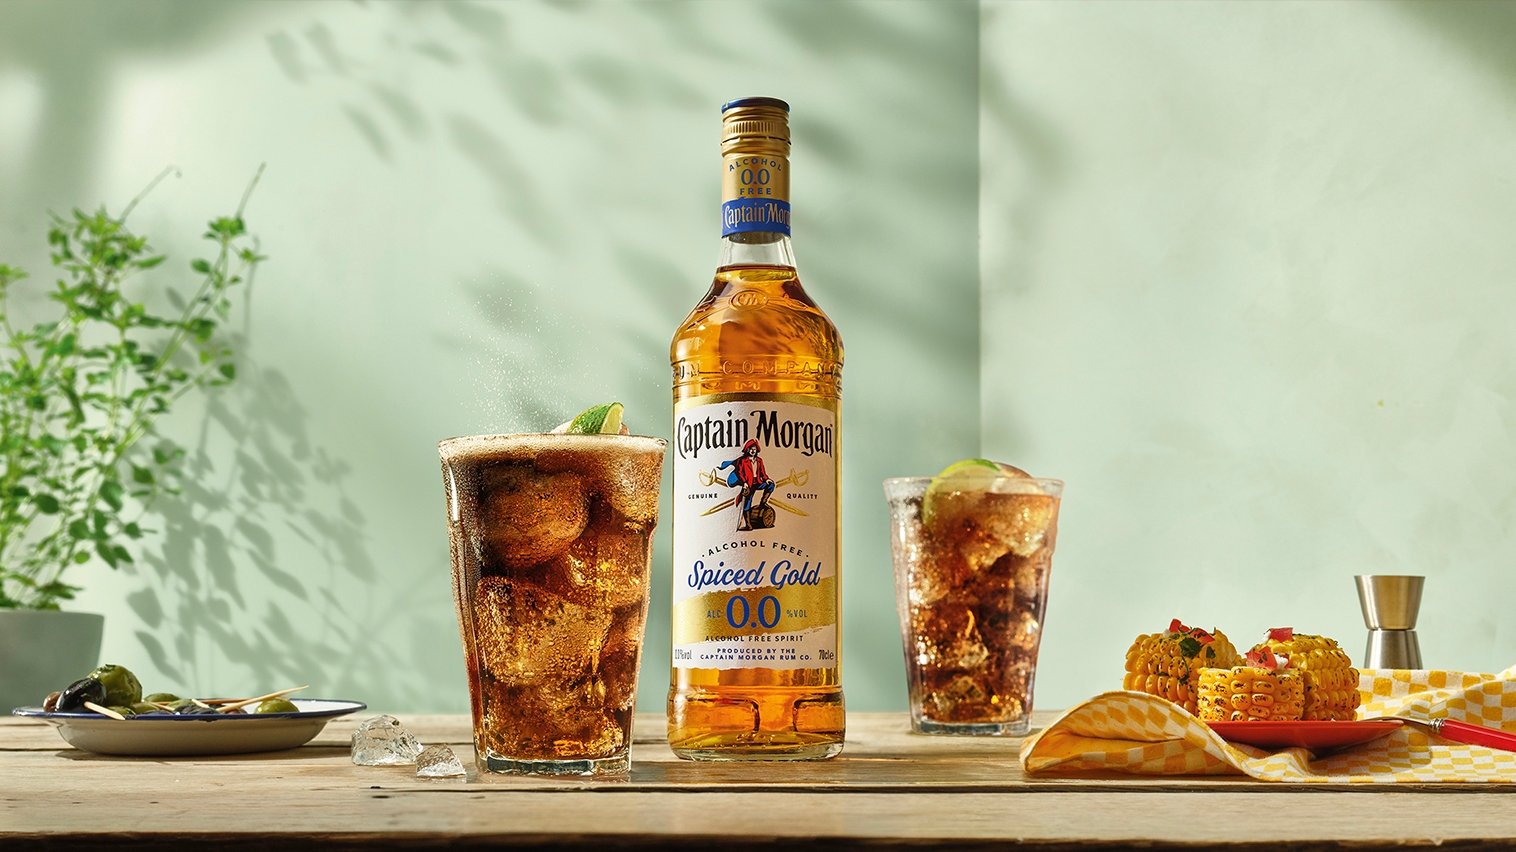 Captain Morgan Spiced Gold 0.0% and Cola serve 